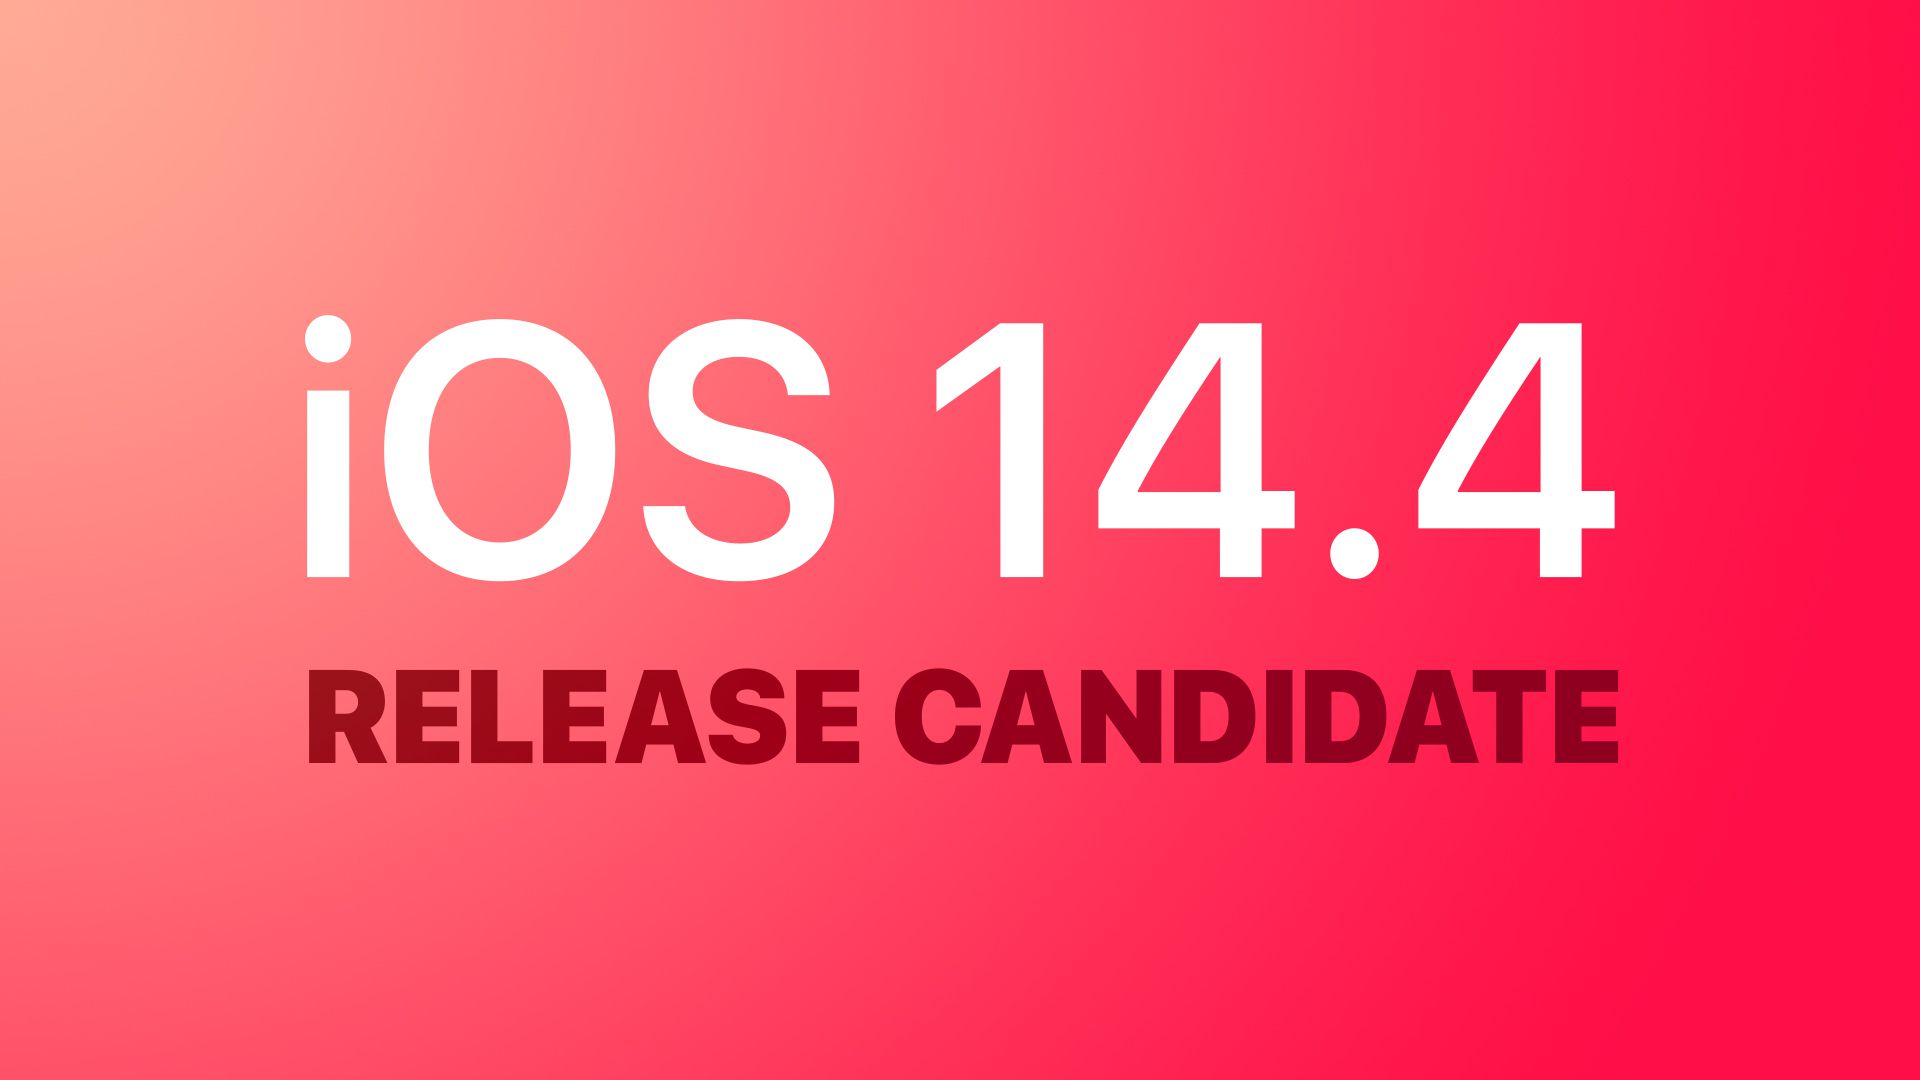 Apple Seeds iOS 14.4 and iPadOS 14.4 Release Candidates for Developers and Public Beta Testers